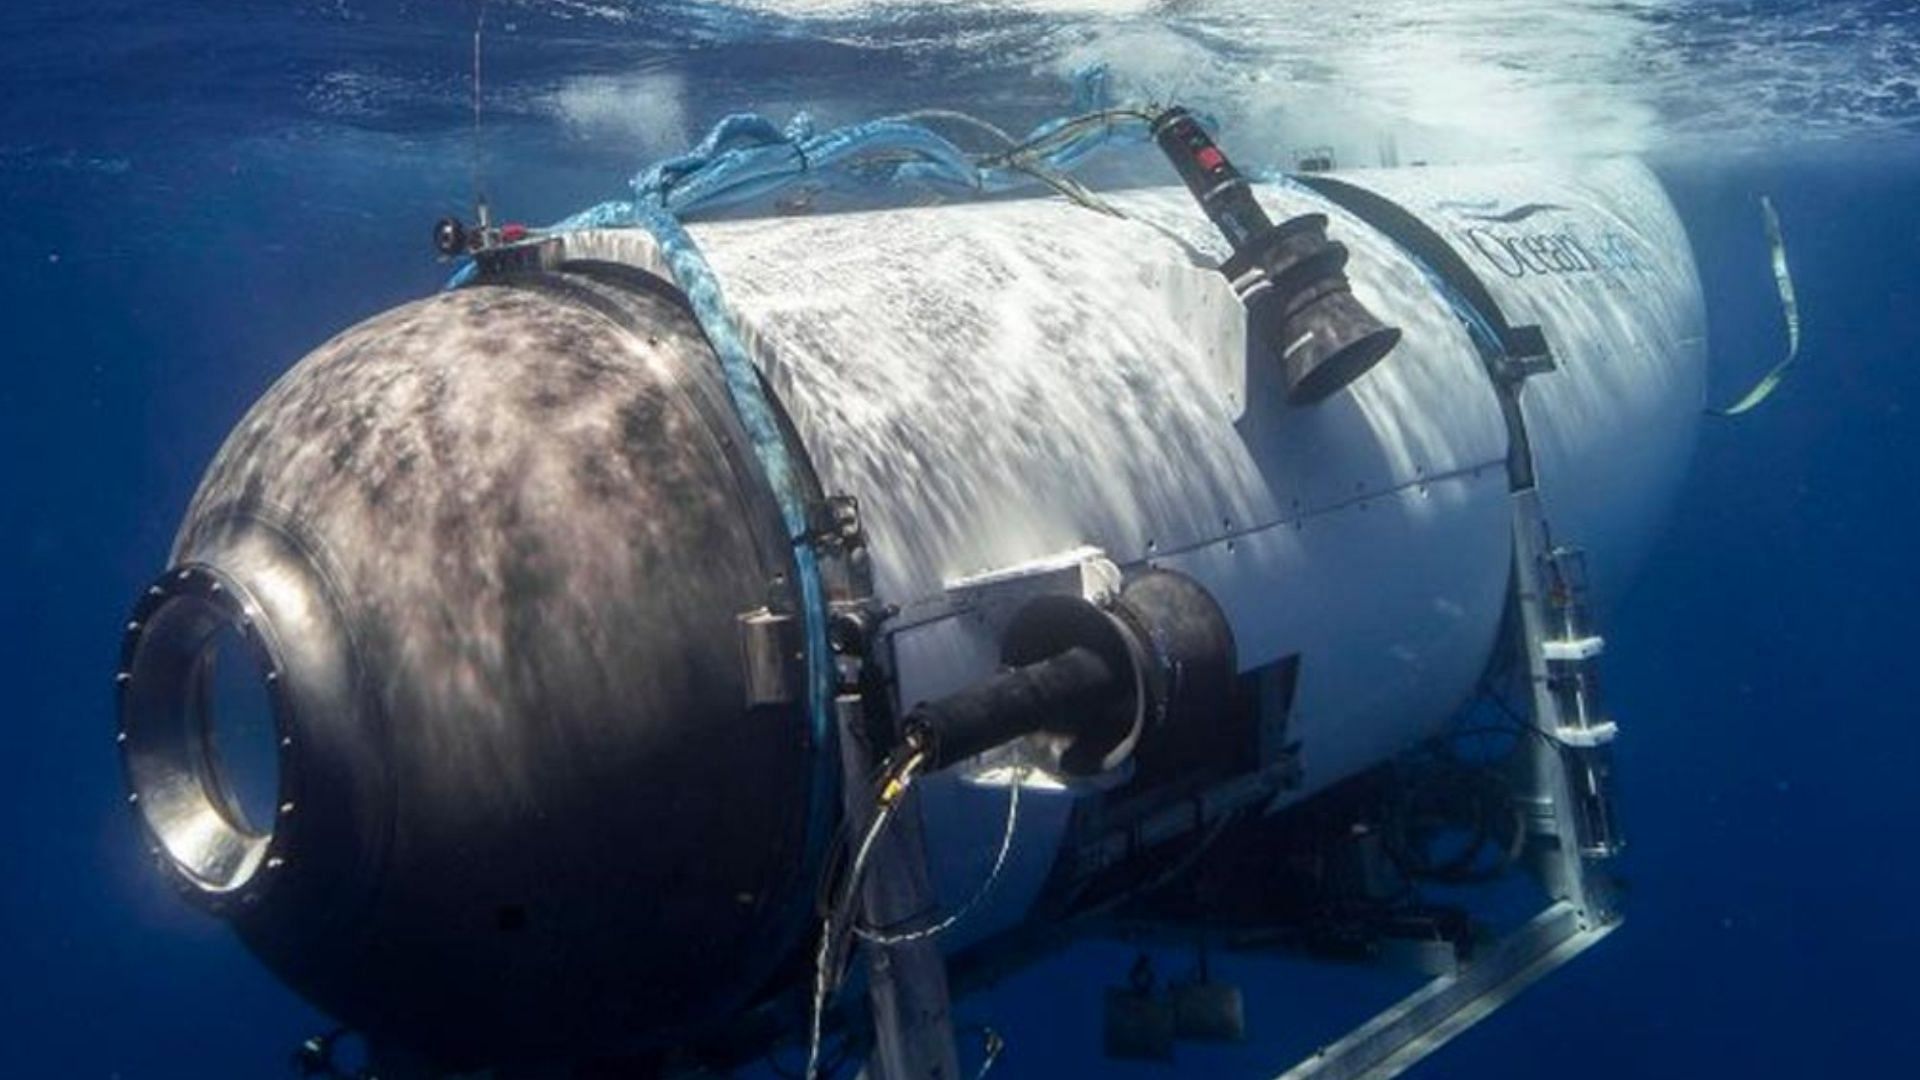 The Titanic submersible that went missing with five tourists onboard. (Image via Twitter/OceanGate)